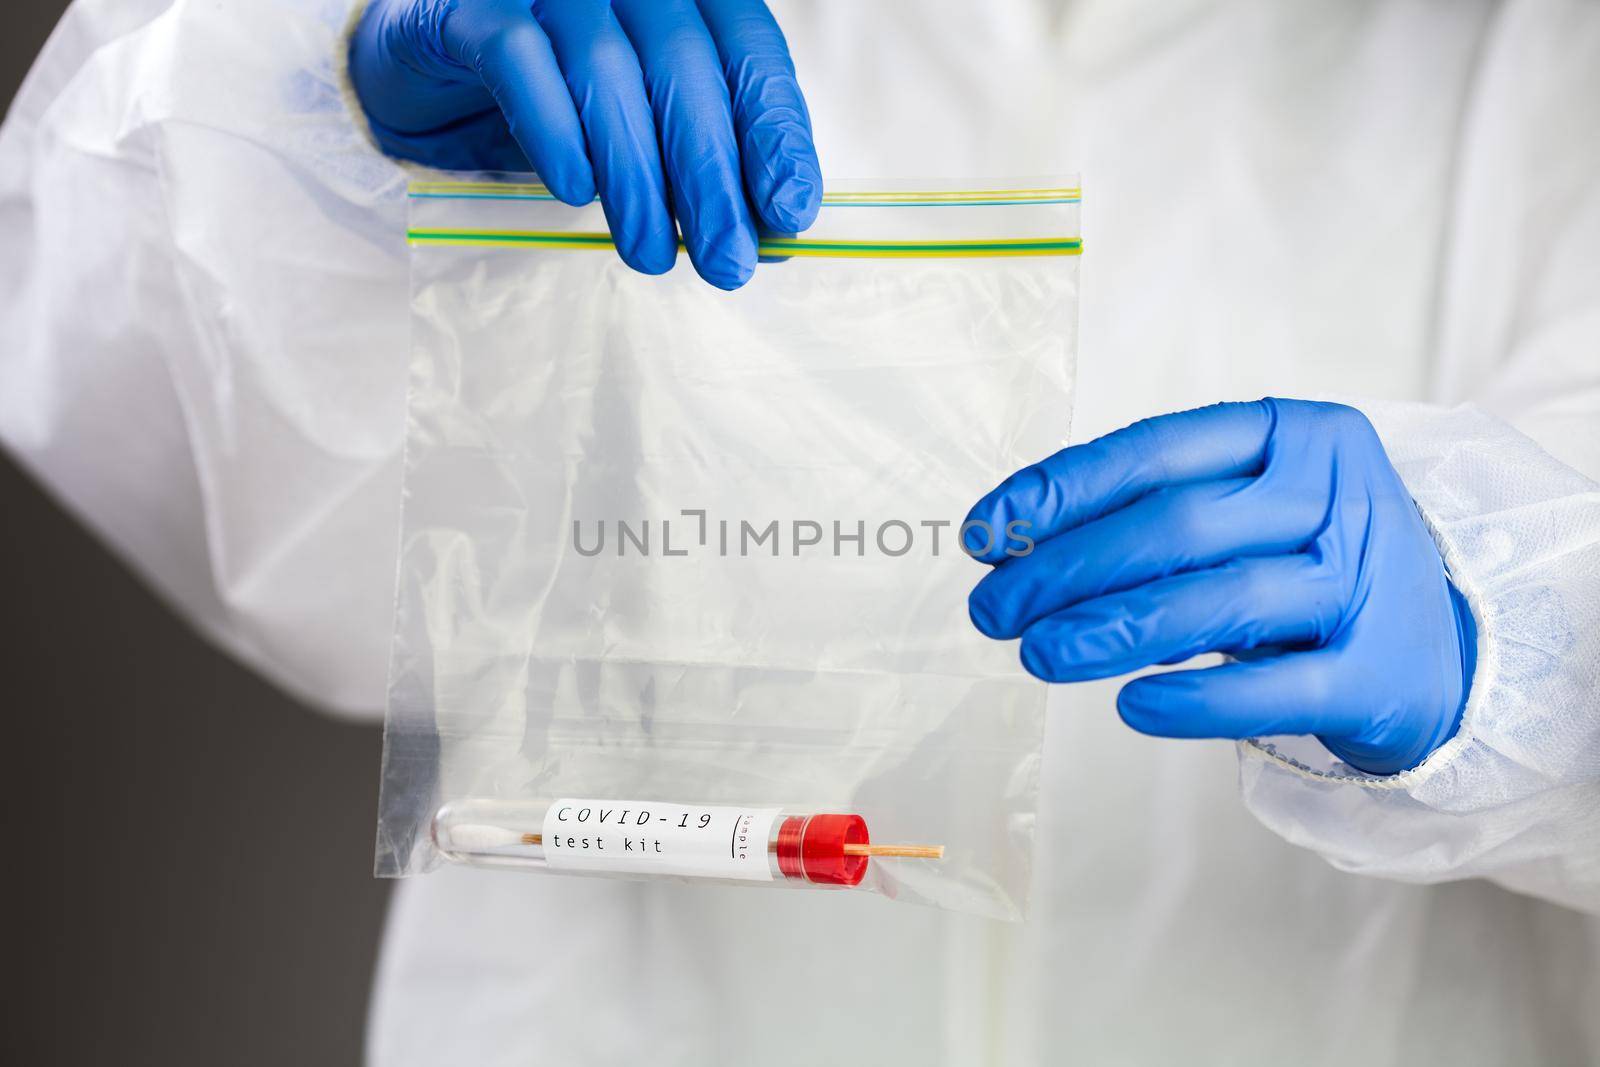 Coronavirus COVID-19 self swab collection kit,scientist in blue surgical gloves and white protective suit holding specimen testing equipment in a transparent bag,PCR nasal and oral sample test tube